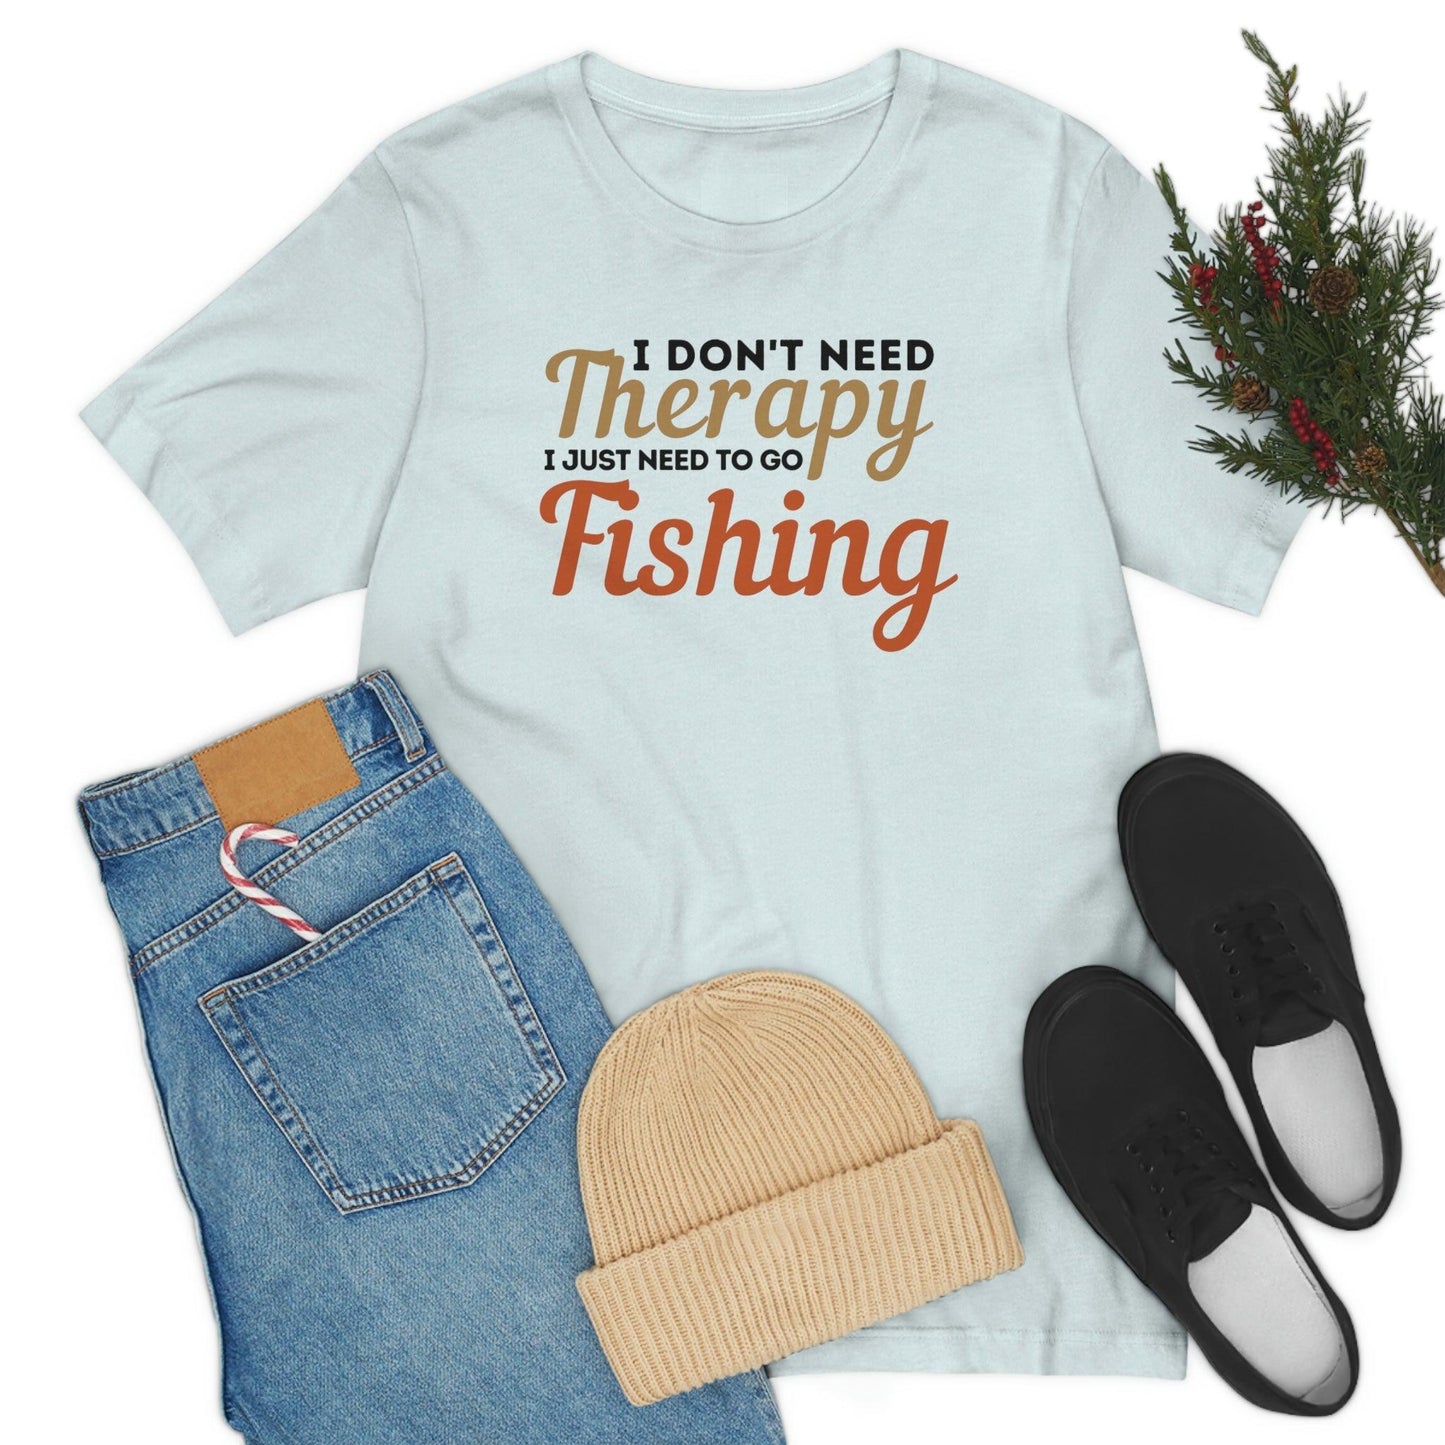 I don't need therapy I just need to go Fishing, fishing shirt, dad shirt, dad gift, gift for outdoor lover, fishing gift nature lover shirt - Giftsmojo